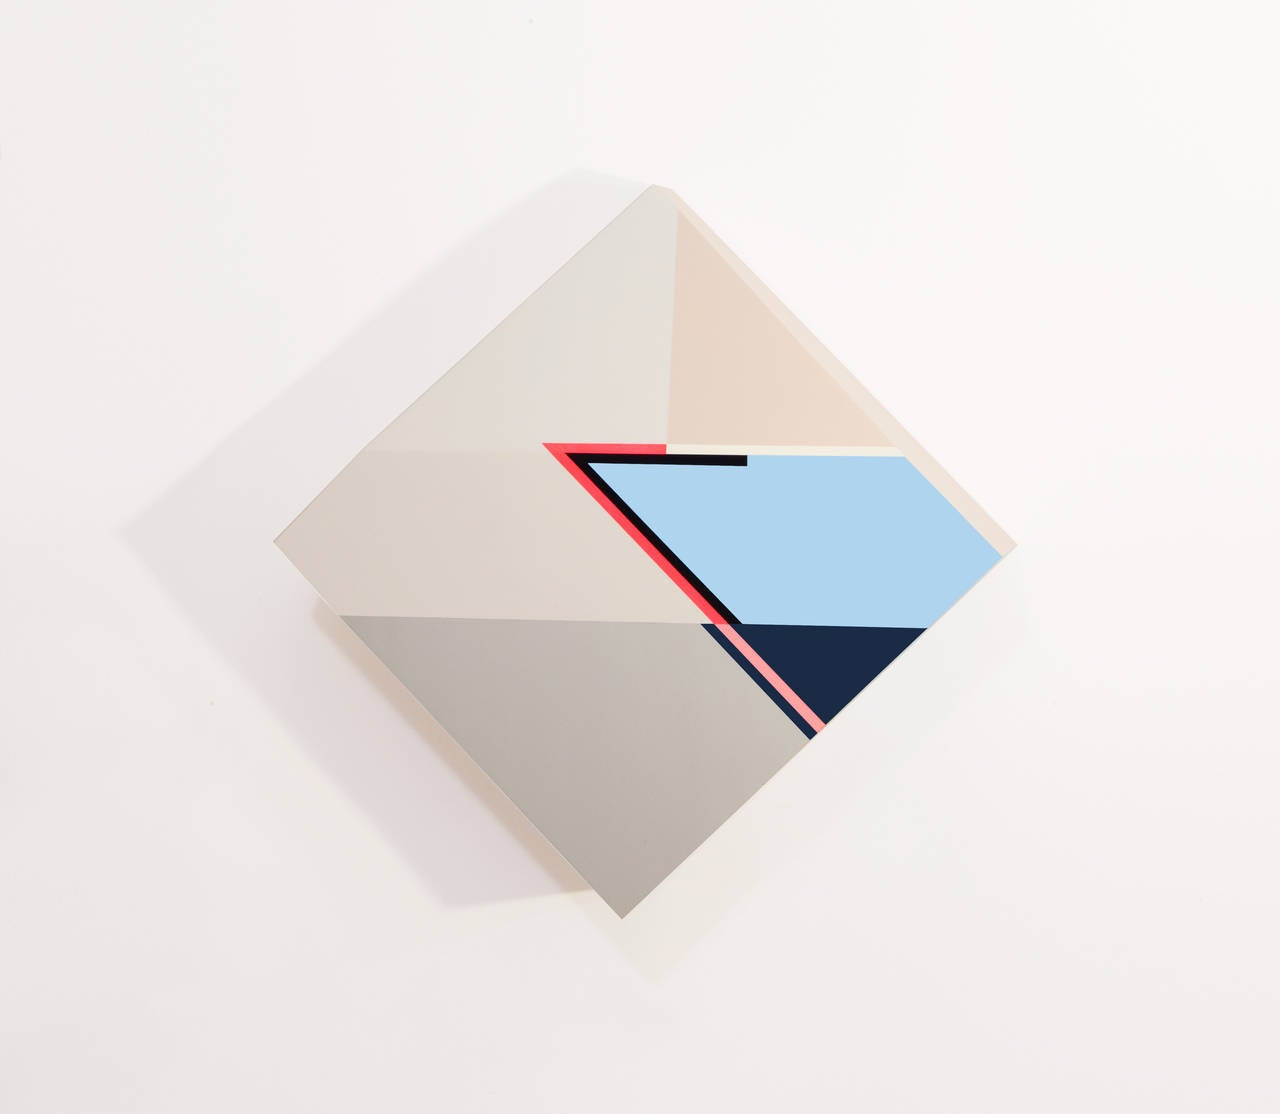 Zin Helena Song Abstract Sculpture - Origami #20 - Blue Cream and Red Square Geometric Sculptural Painting on Wood